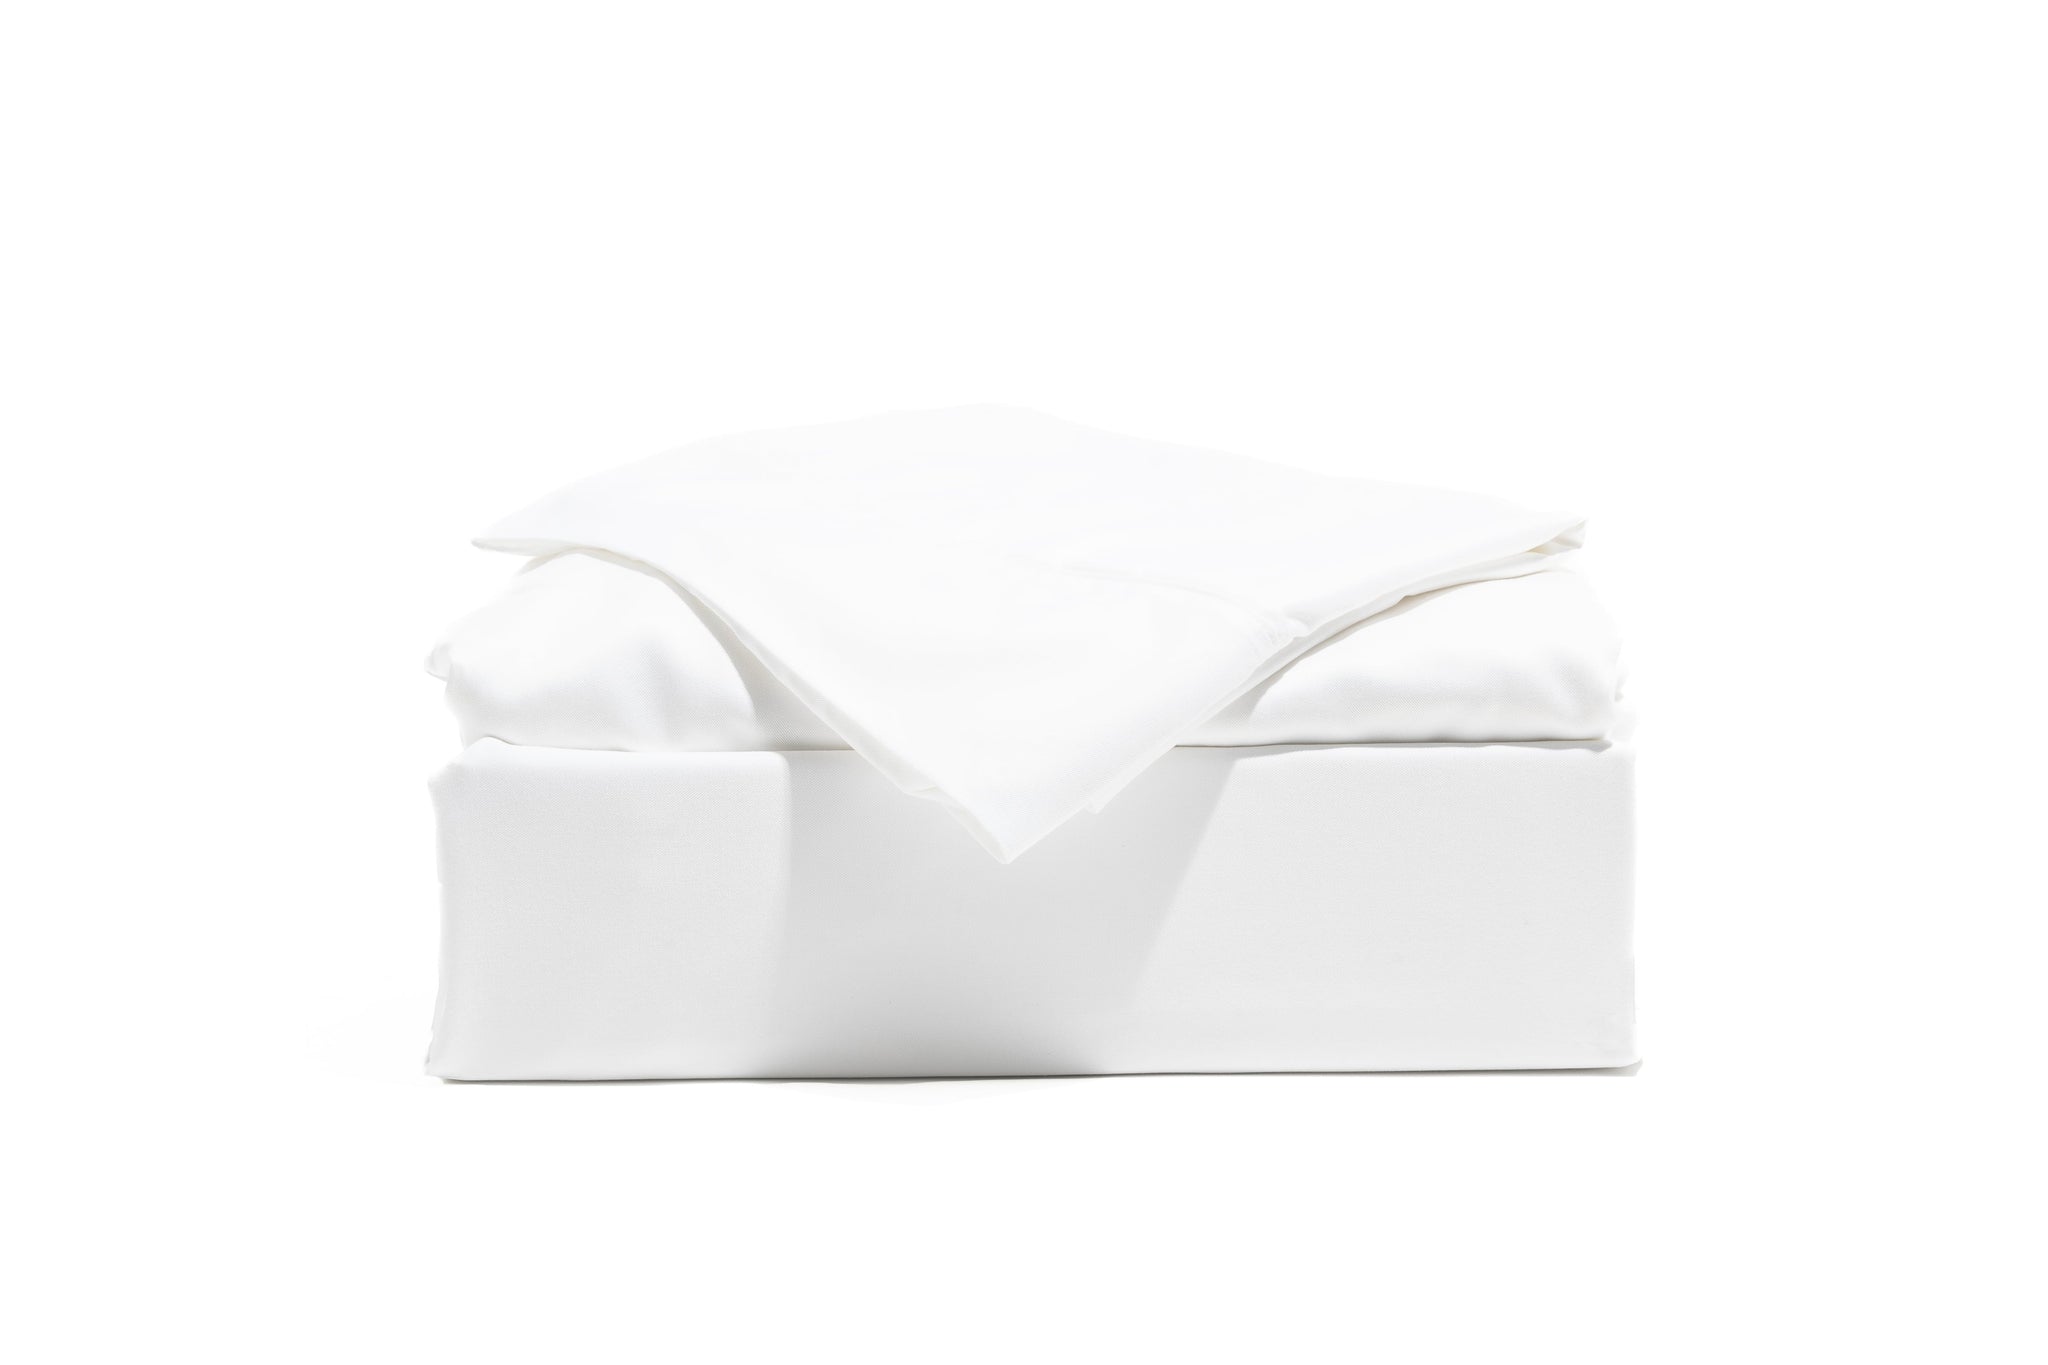 A Bamboo Bed Sheet Set in white.